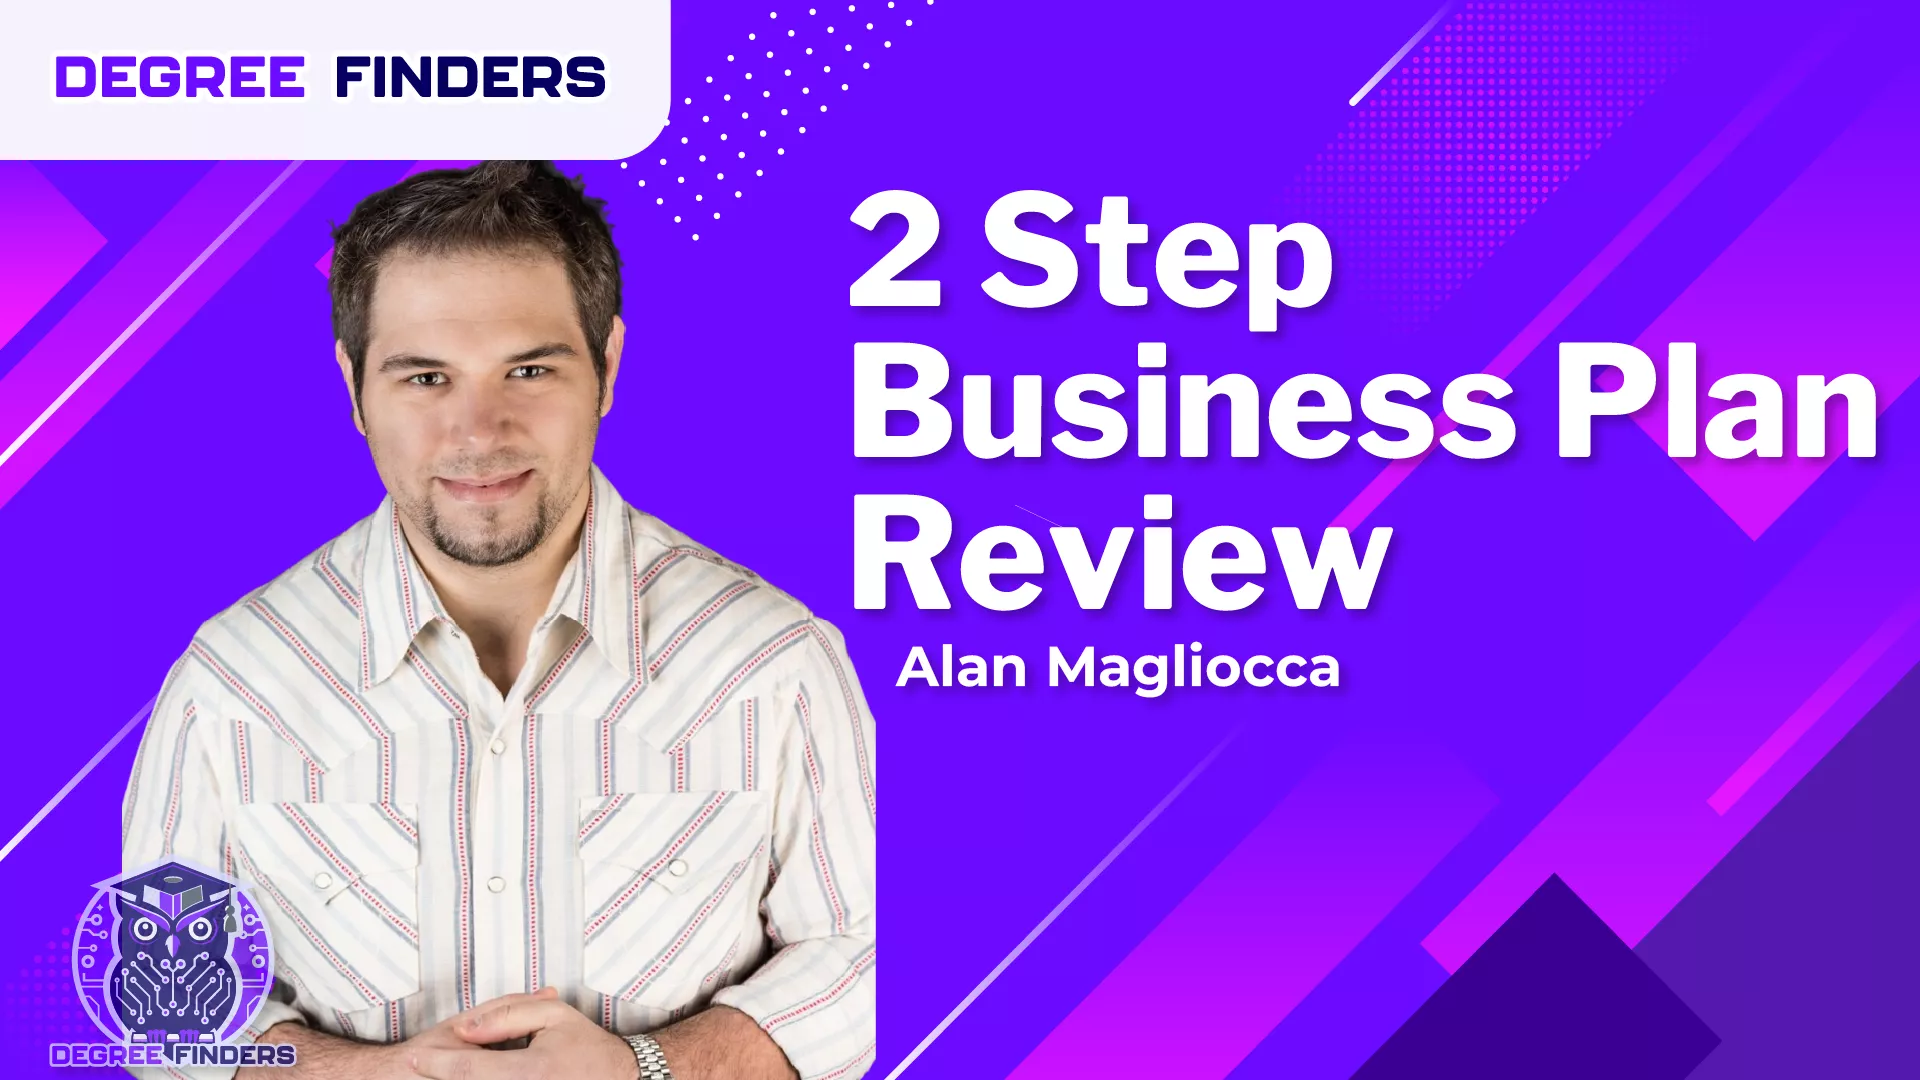 2 Step Business Plan Review